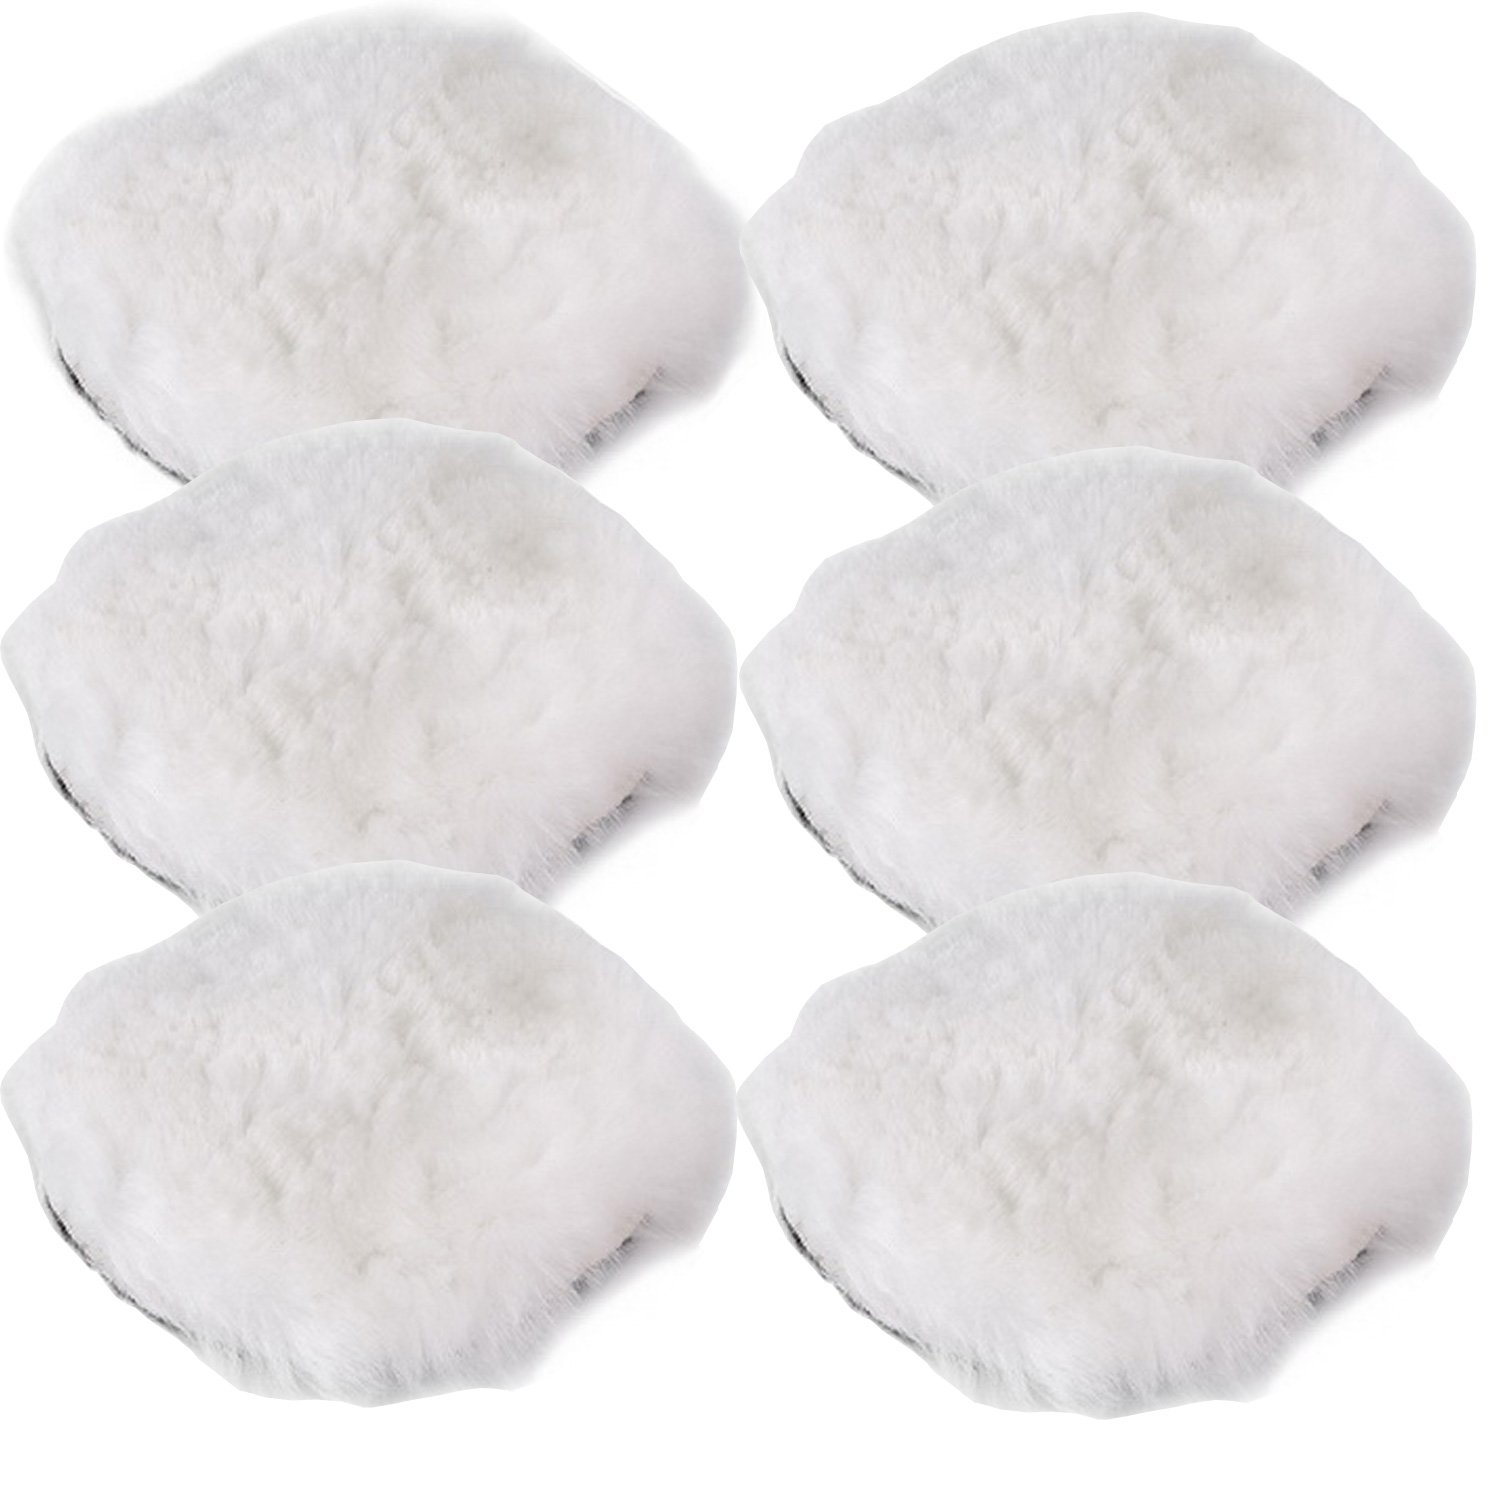 OxoxO aus Wolle, weich, Buffer-Pad-Set - 3"/ 80mm Wolle Polierschwamm Polierschwamm Woolen Pad Set (6pcs)